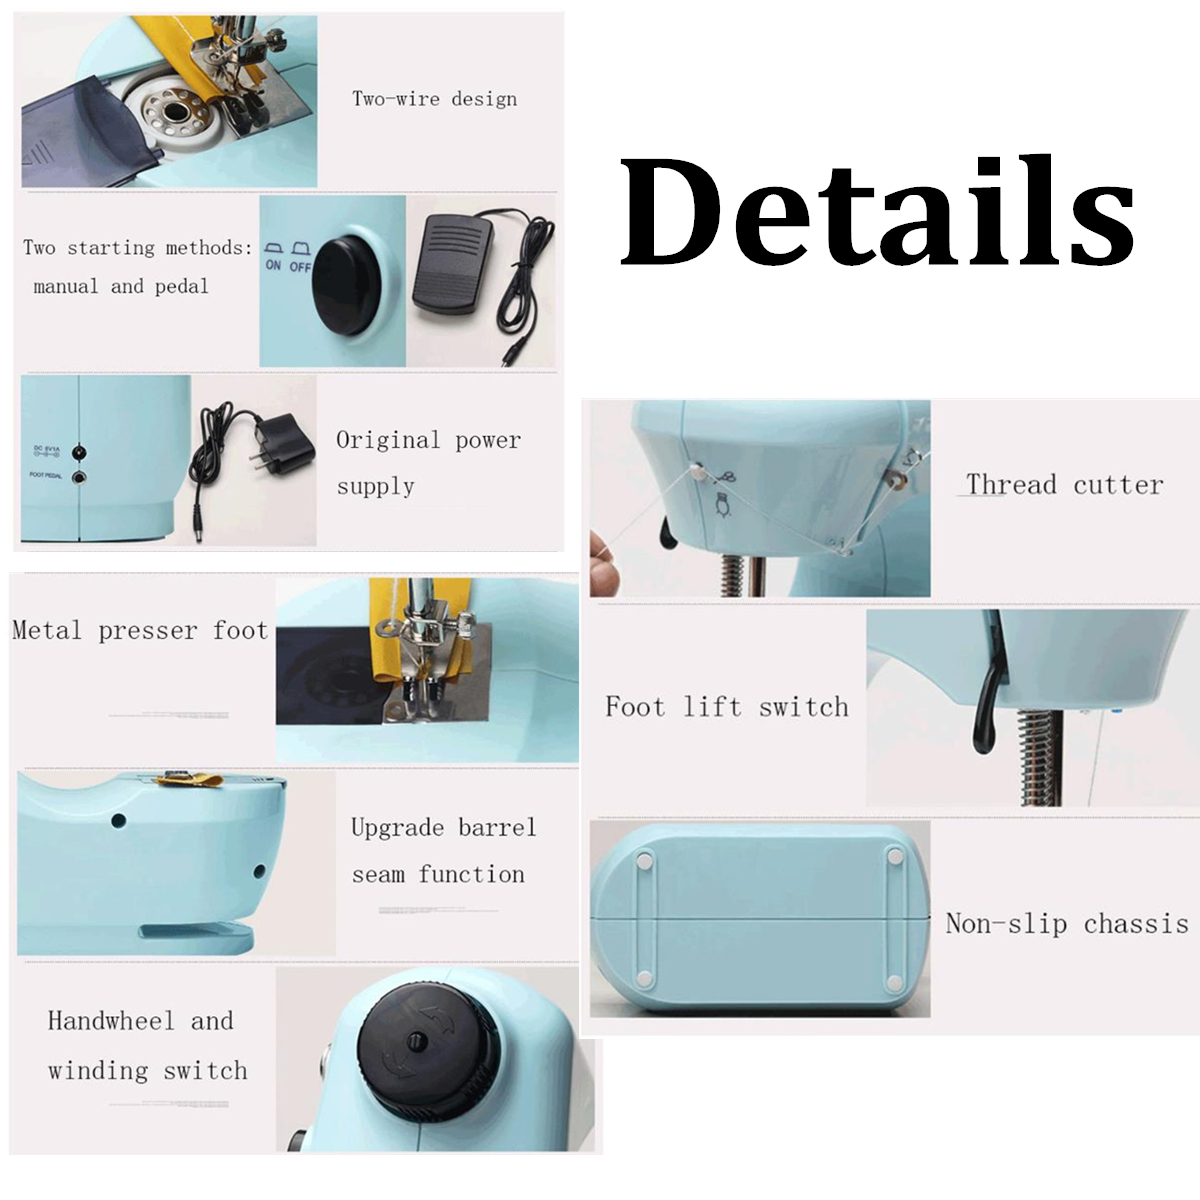 Mini-Portable-Electric-Desktop-Sewing-Machine-2-Speeds-For-DIY-Stitch-Clothes-Fabric-1690684-6